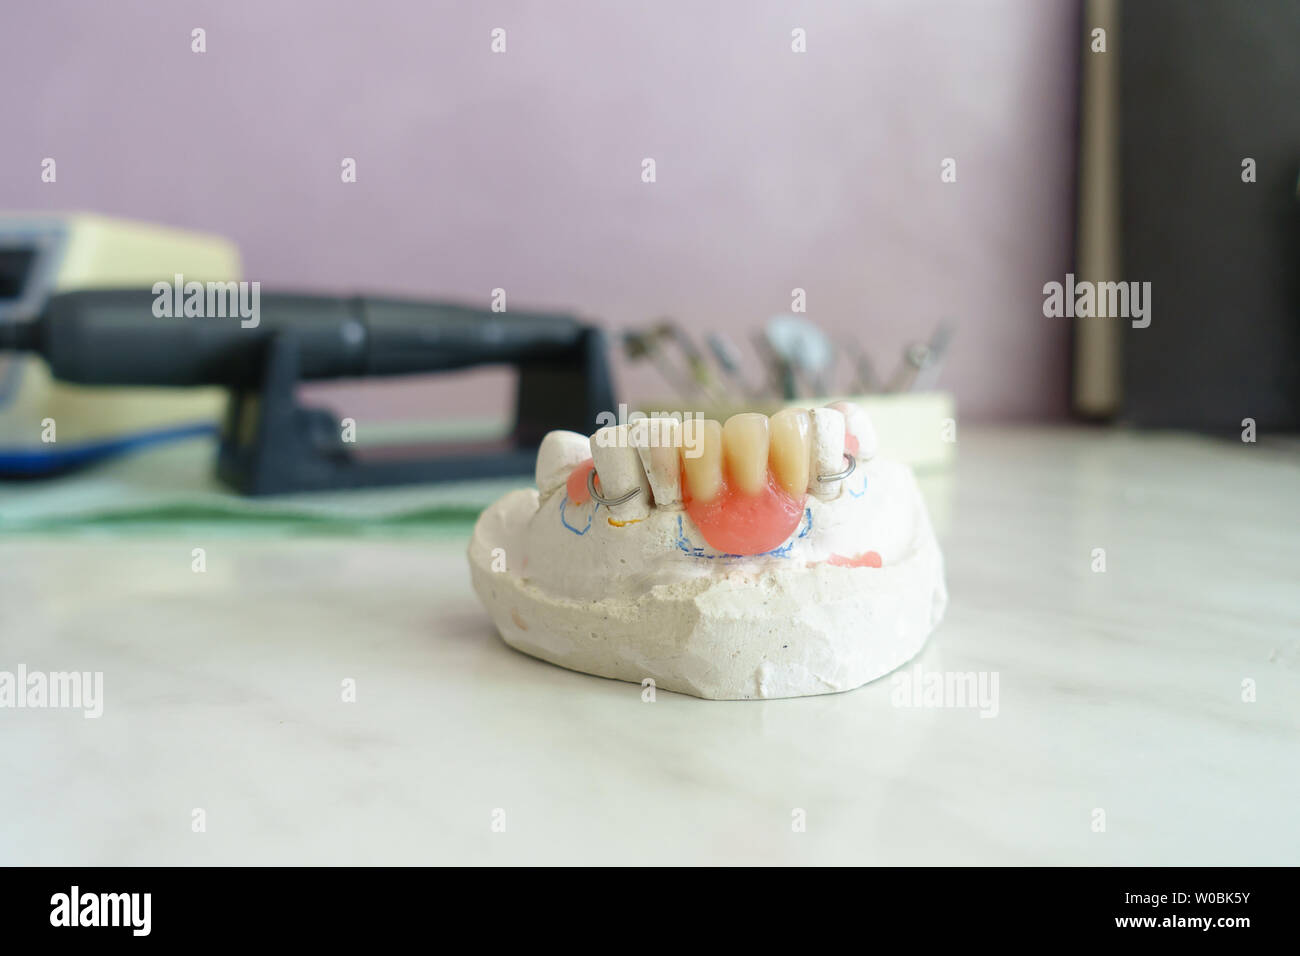 Artificial removable dental prosthesis to restore the integrity of the dentition Stock Photo